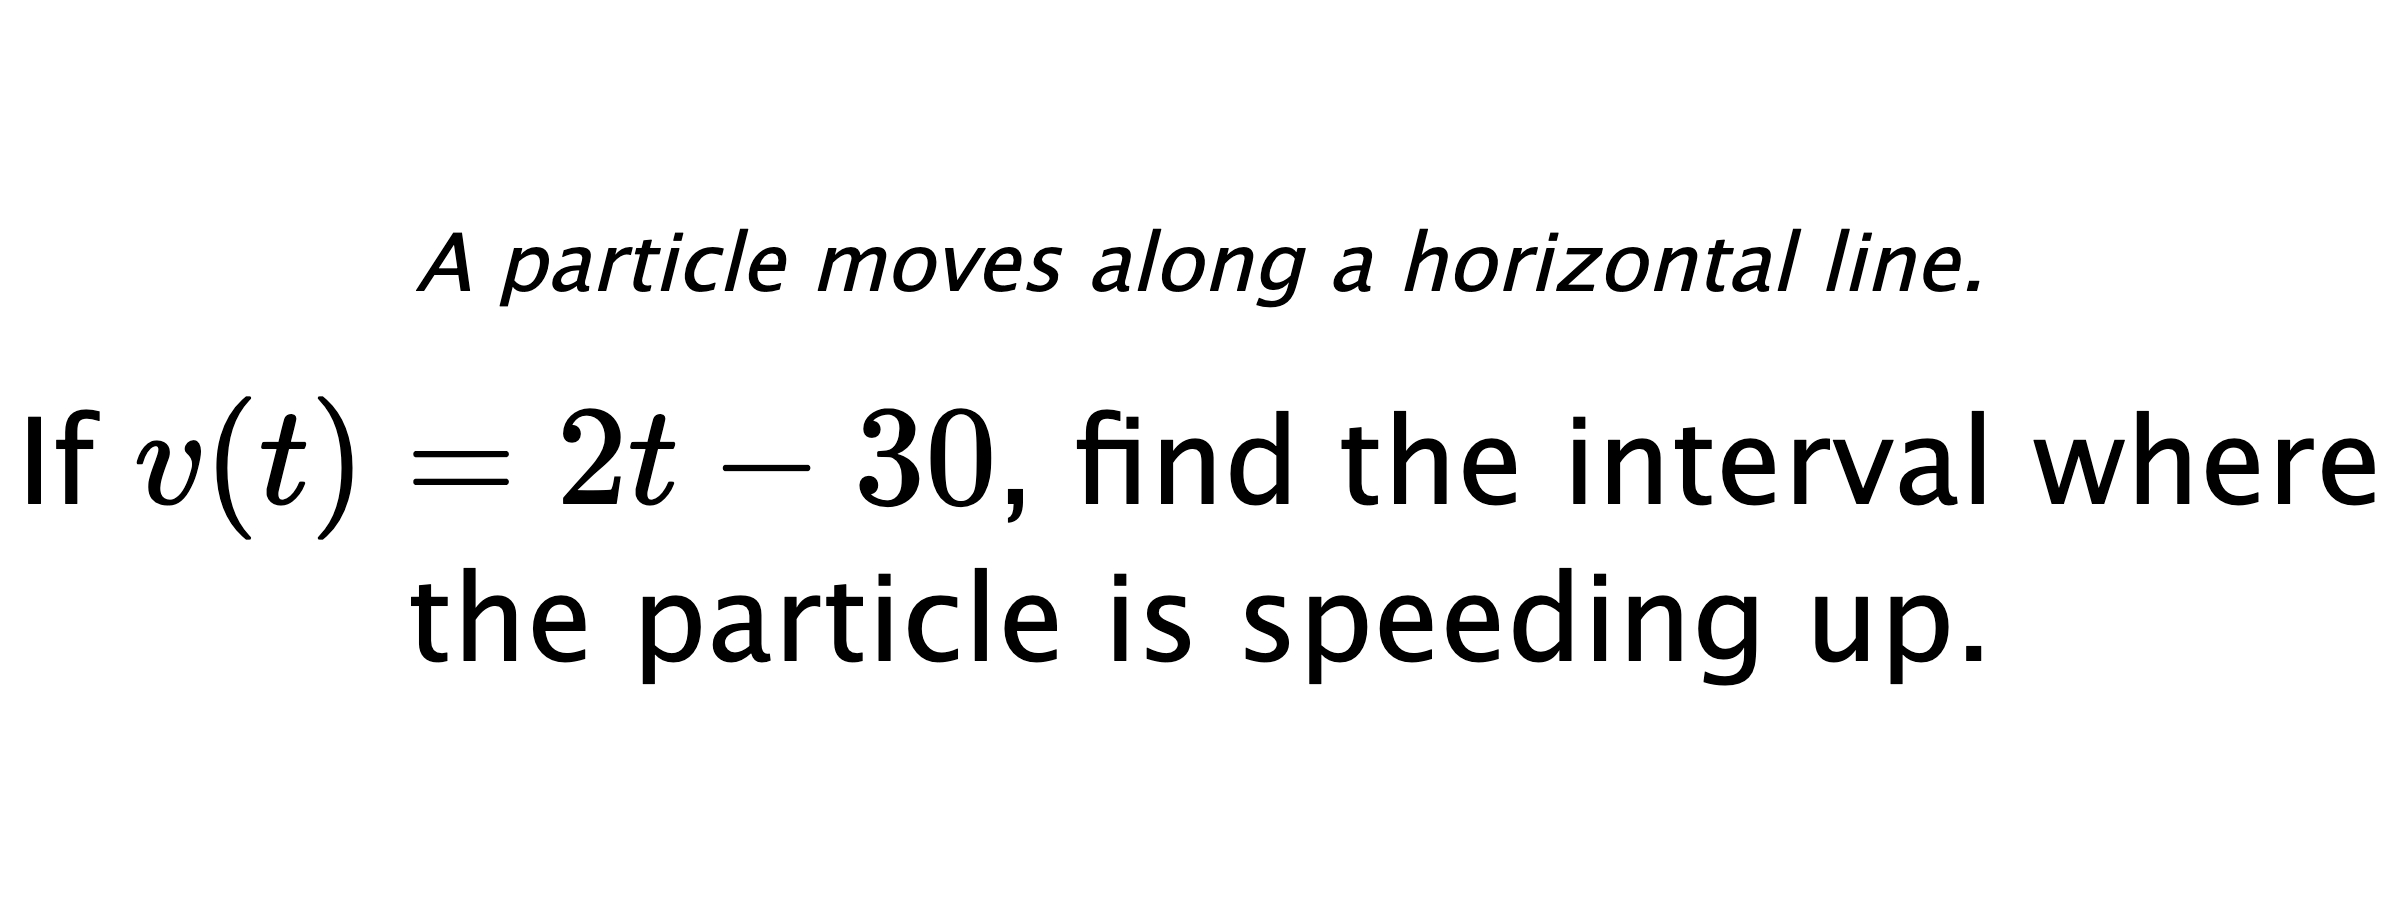 A particle moves along a horizontal line. If $ v(t)=2t-30 $, find the interval where the particle is speeding up.